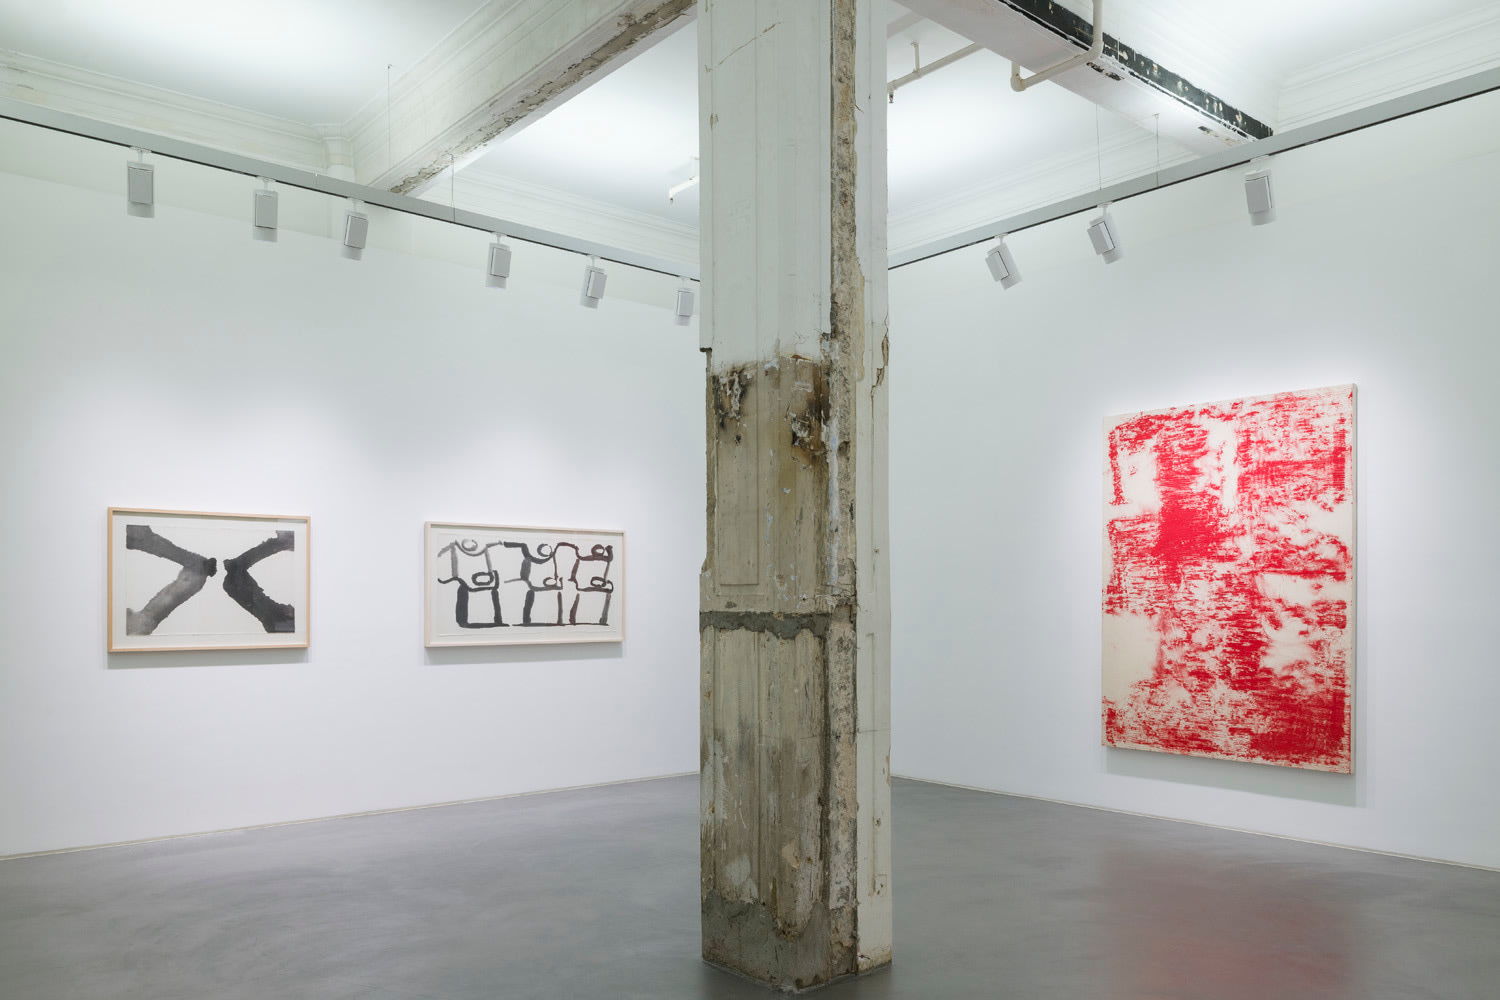 First installation view of the group exhibition be/longing at Lehmann Maupin Hong Kong